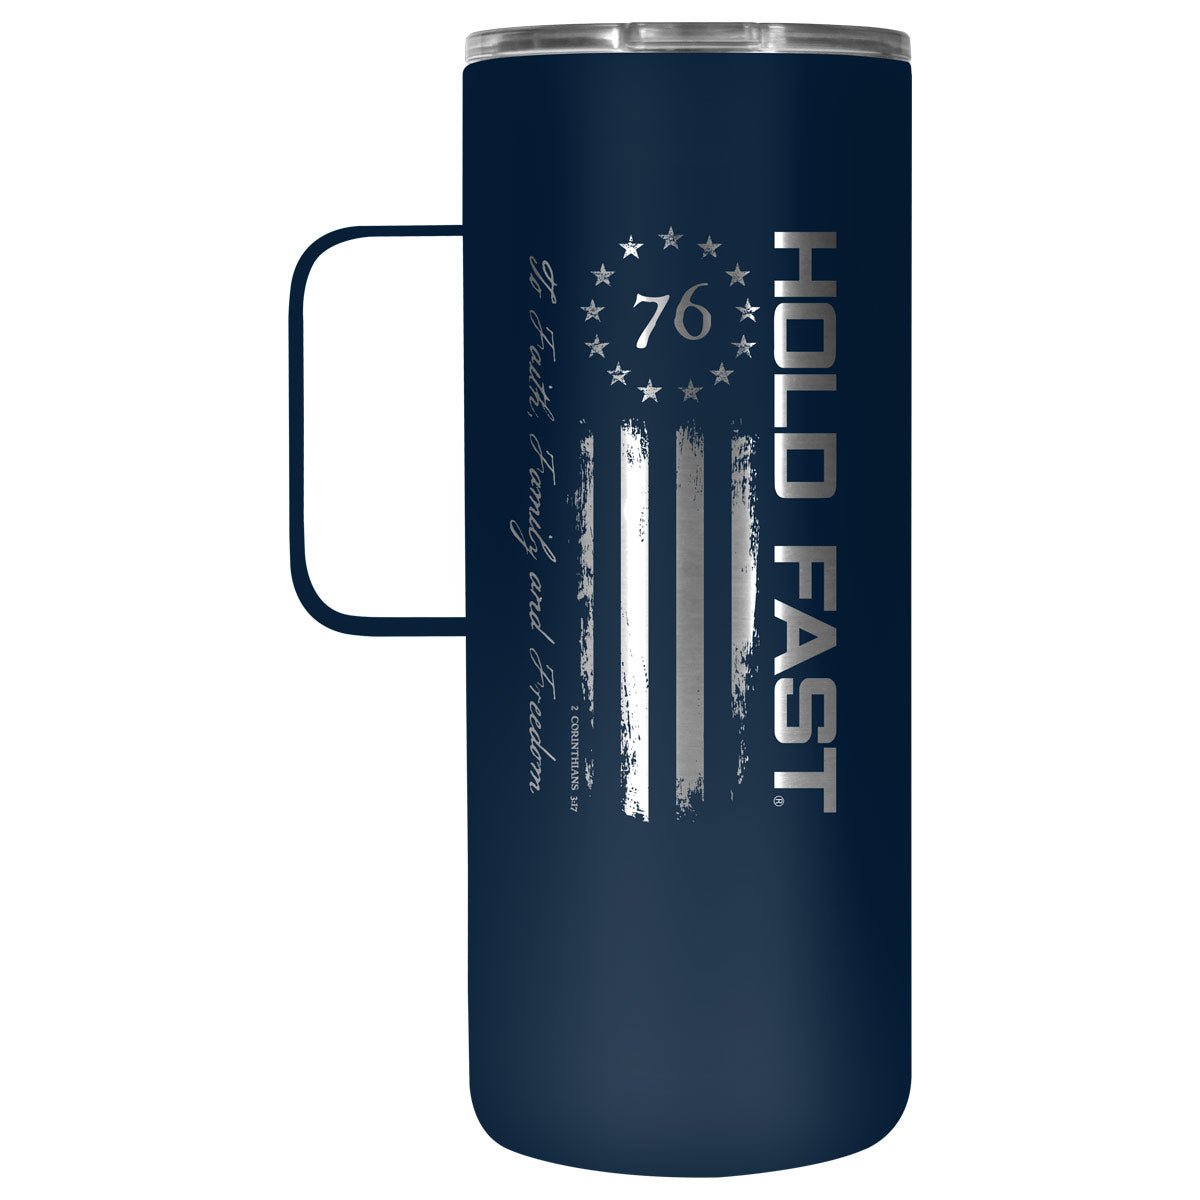 HOLD FAST 22 oz Stainless Steel Mug With Handle 76 | 2FruitBearers